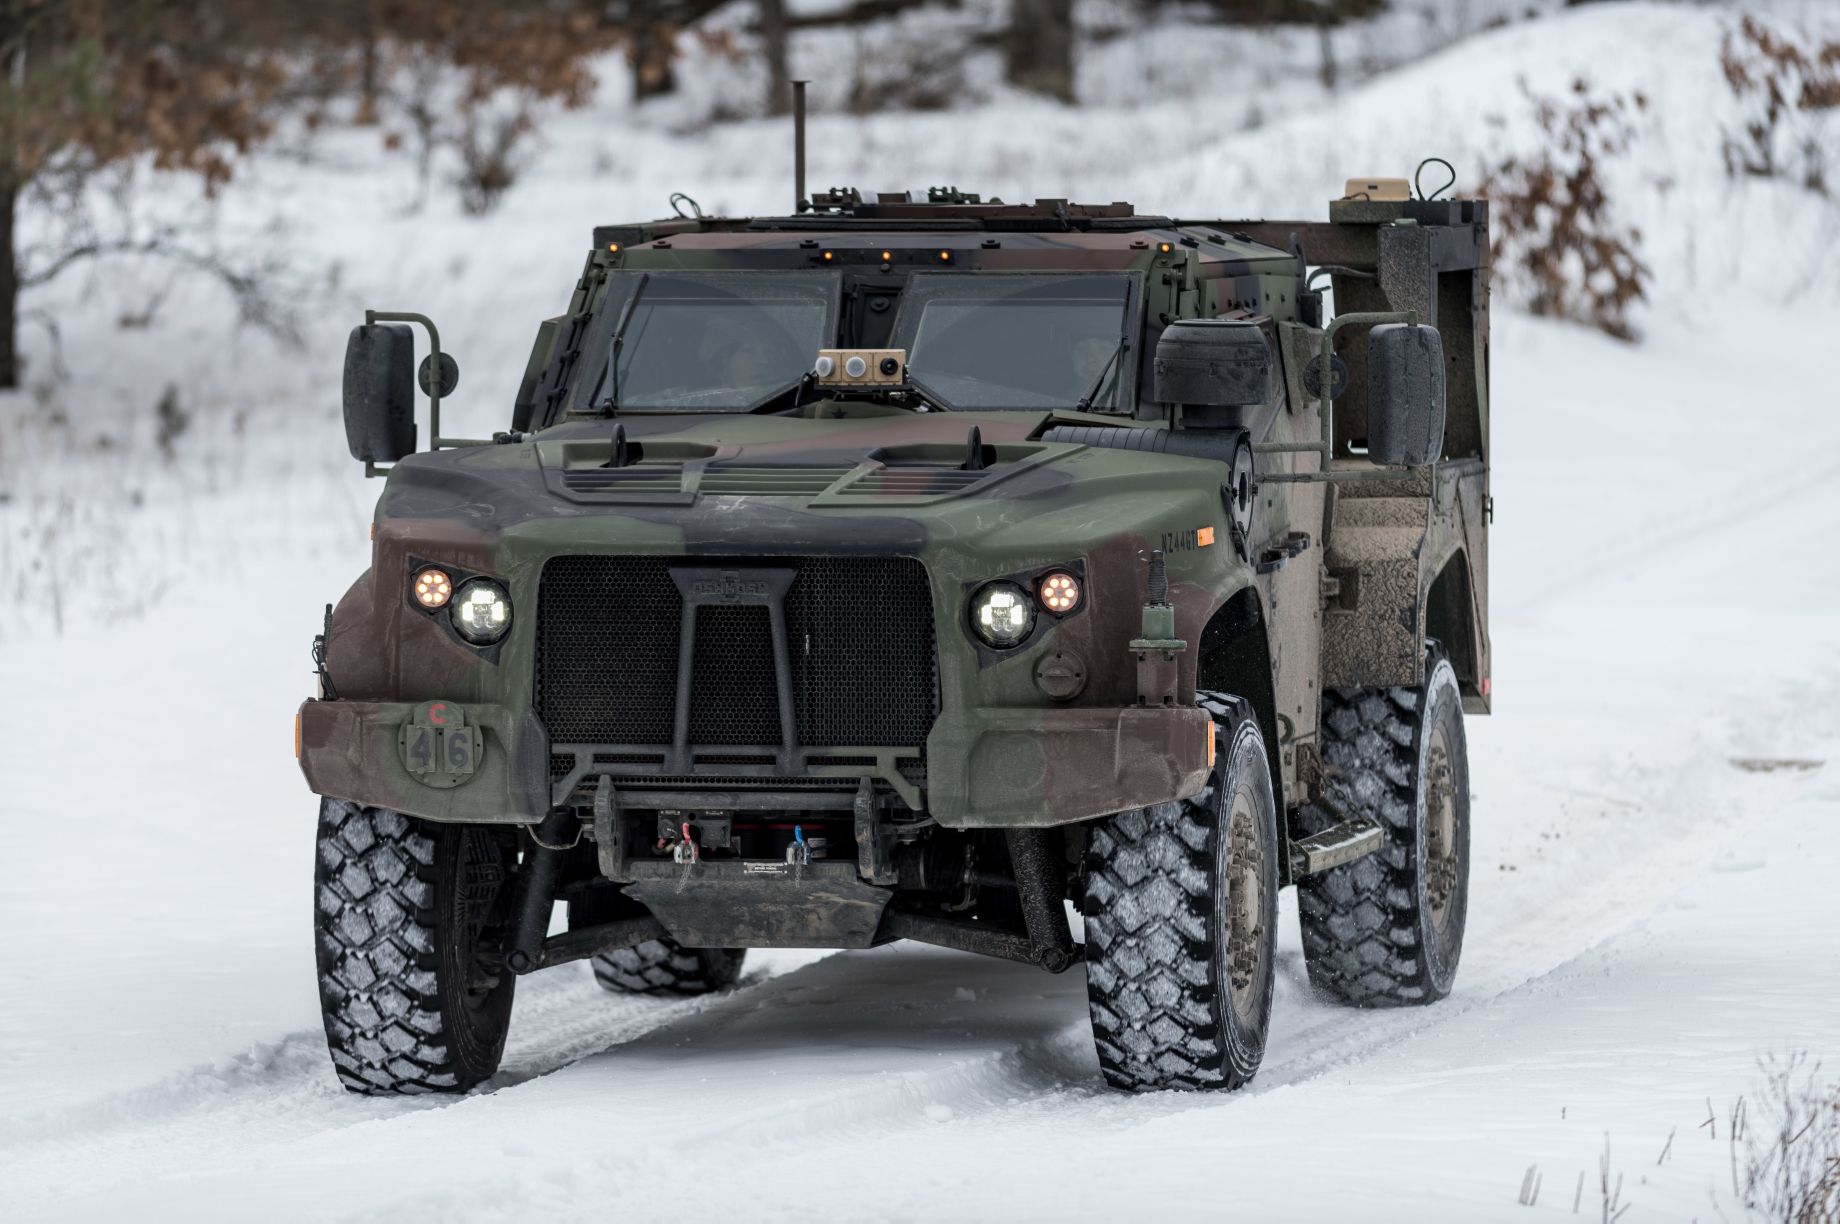 A Joint Light Tactical Vehicle (JLTV) in operation on 29 January. The JLTV is an example of US military service collaboration on weapon systems, which the US Air Force's chief of staff sees taking place more often as defence budgets potentially decline due to Covid-19 spending. (US Department of Defense) (US Department of Defense)